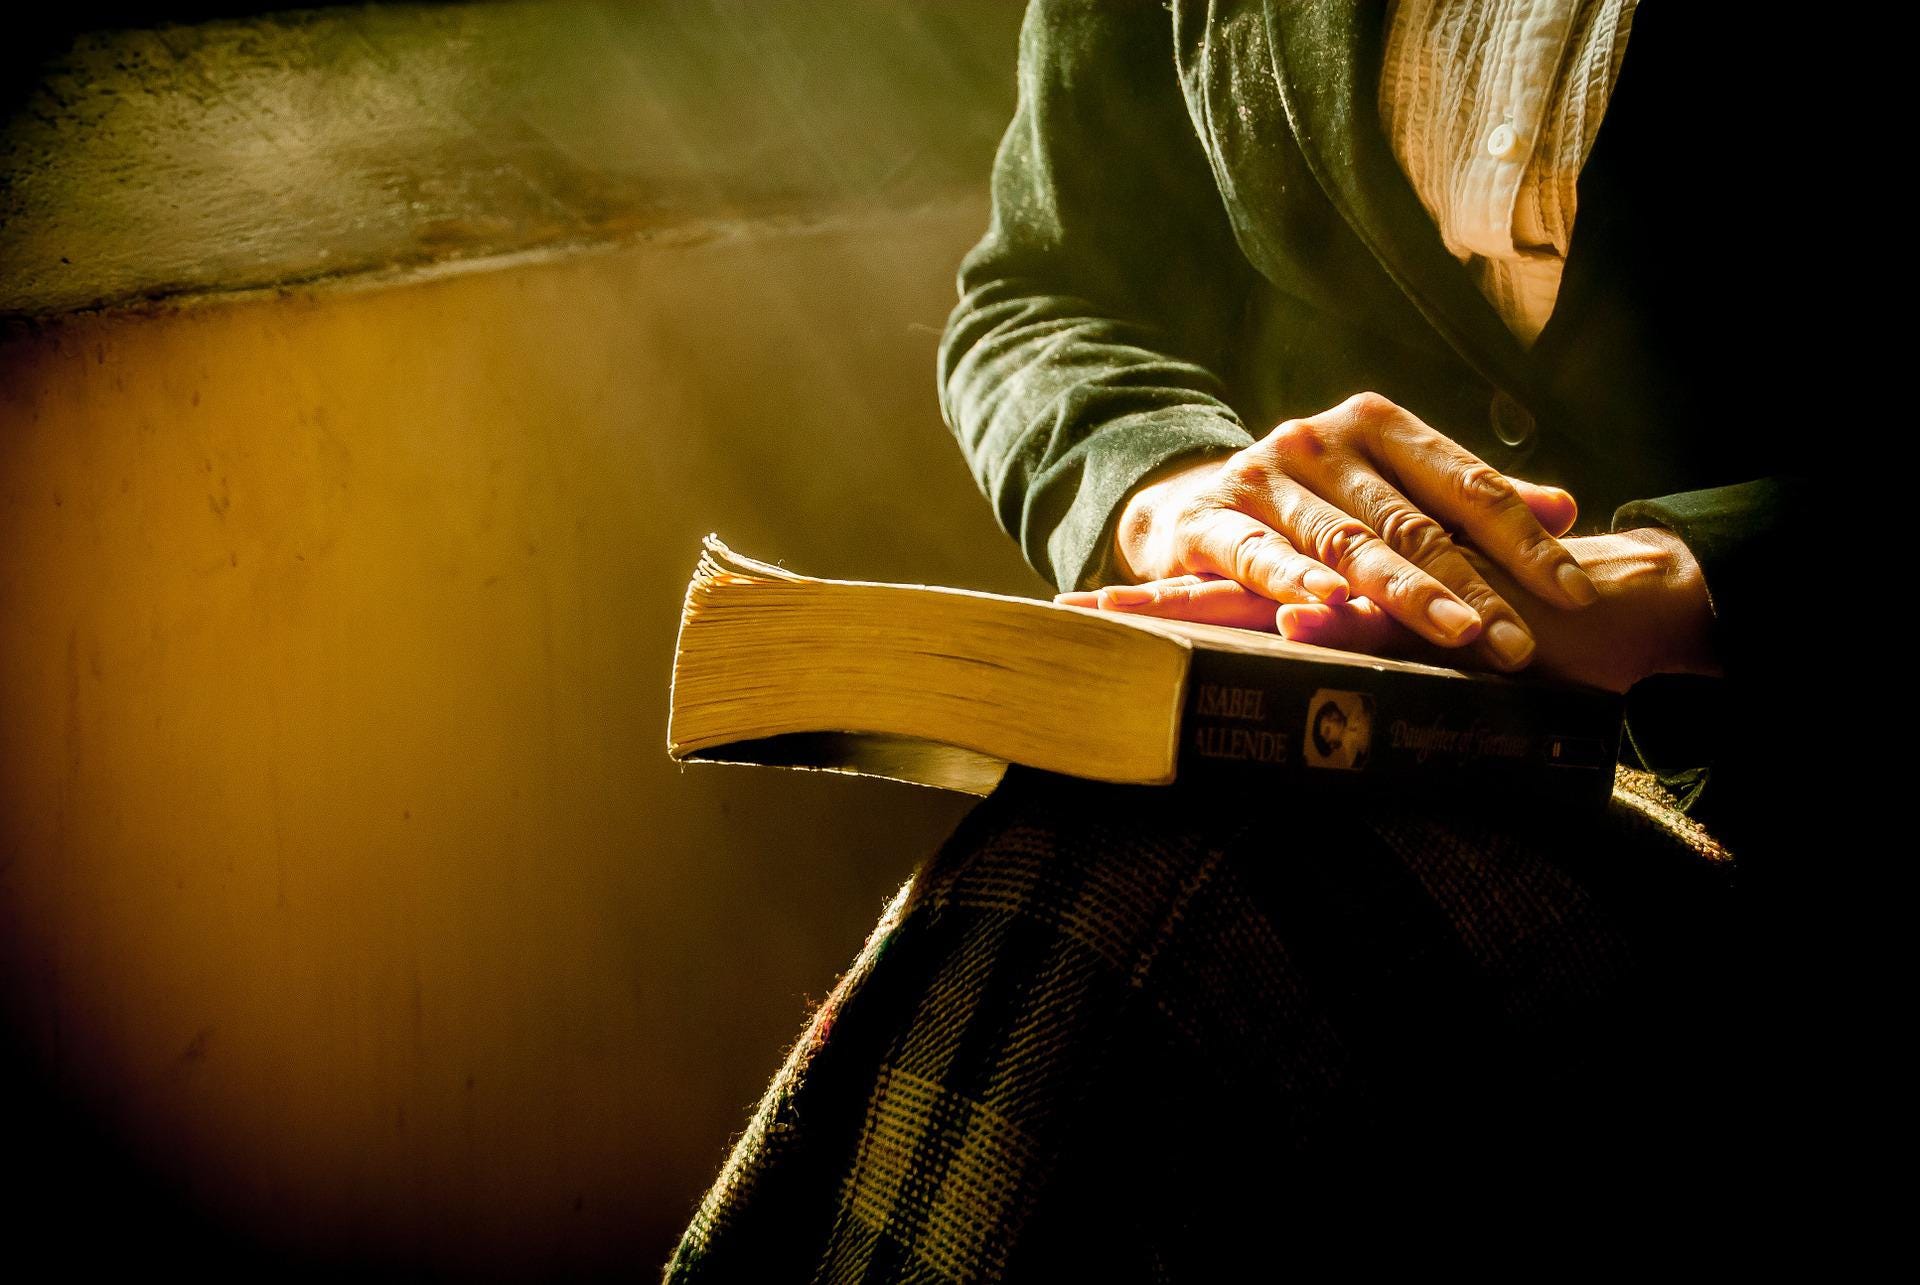 A praying woman with hands on the Bible on her lap